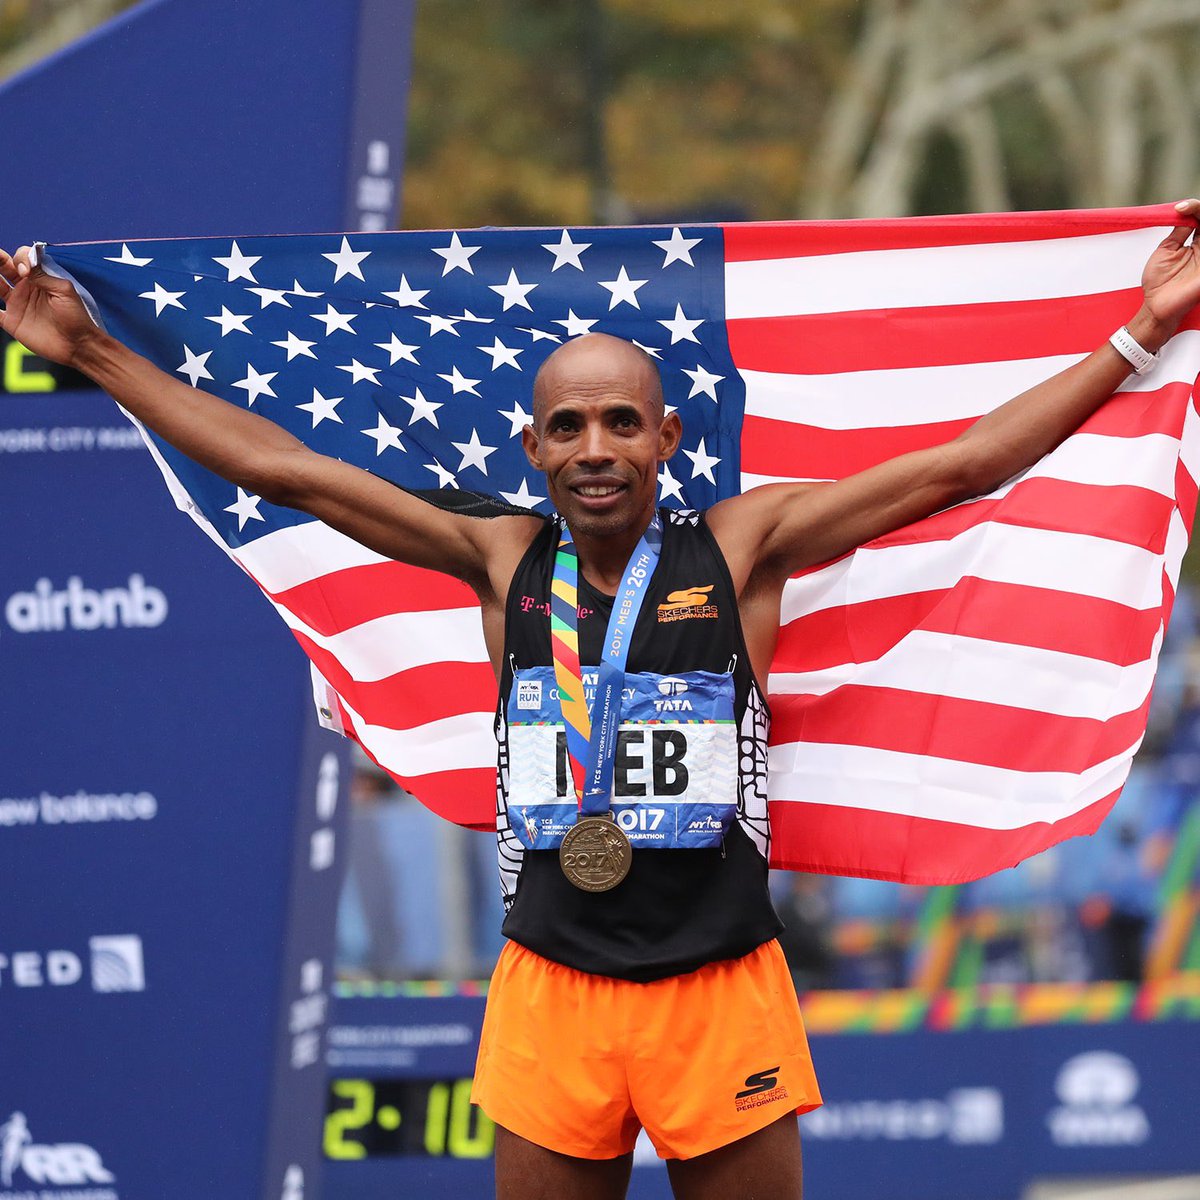 Olympic medalist Meb Keflezighi joins me on my show today at 9:40am. @runmeb